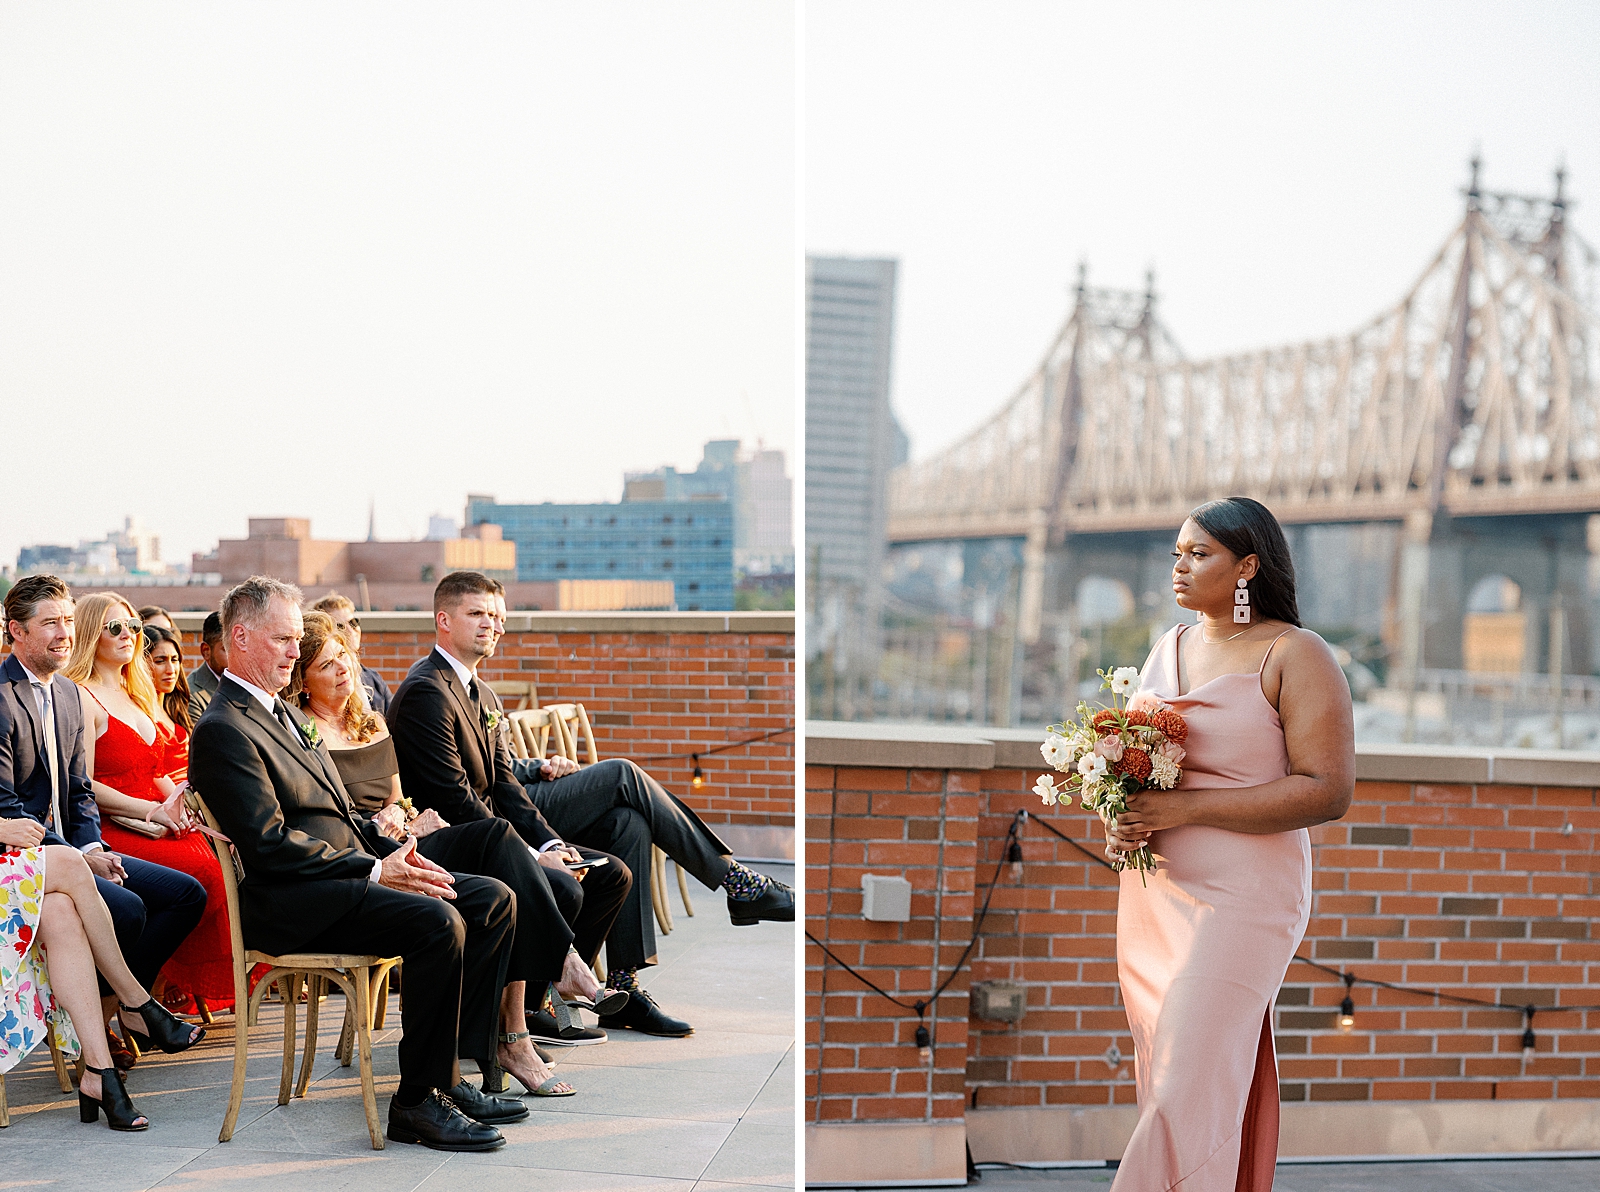 Guests listening and Wedding party member holding bouquet with Queensboro bridge behind her